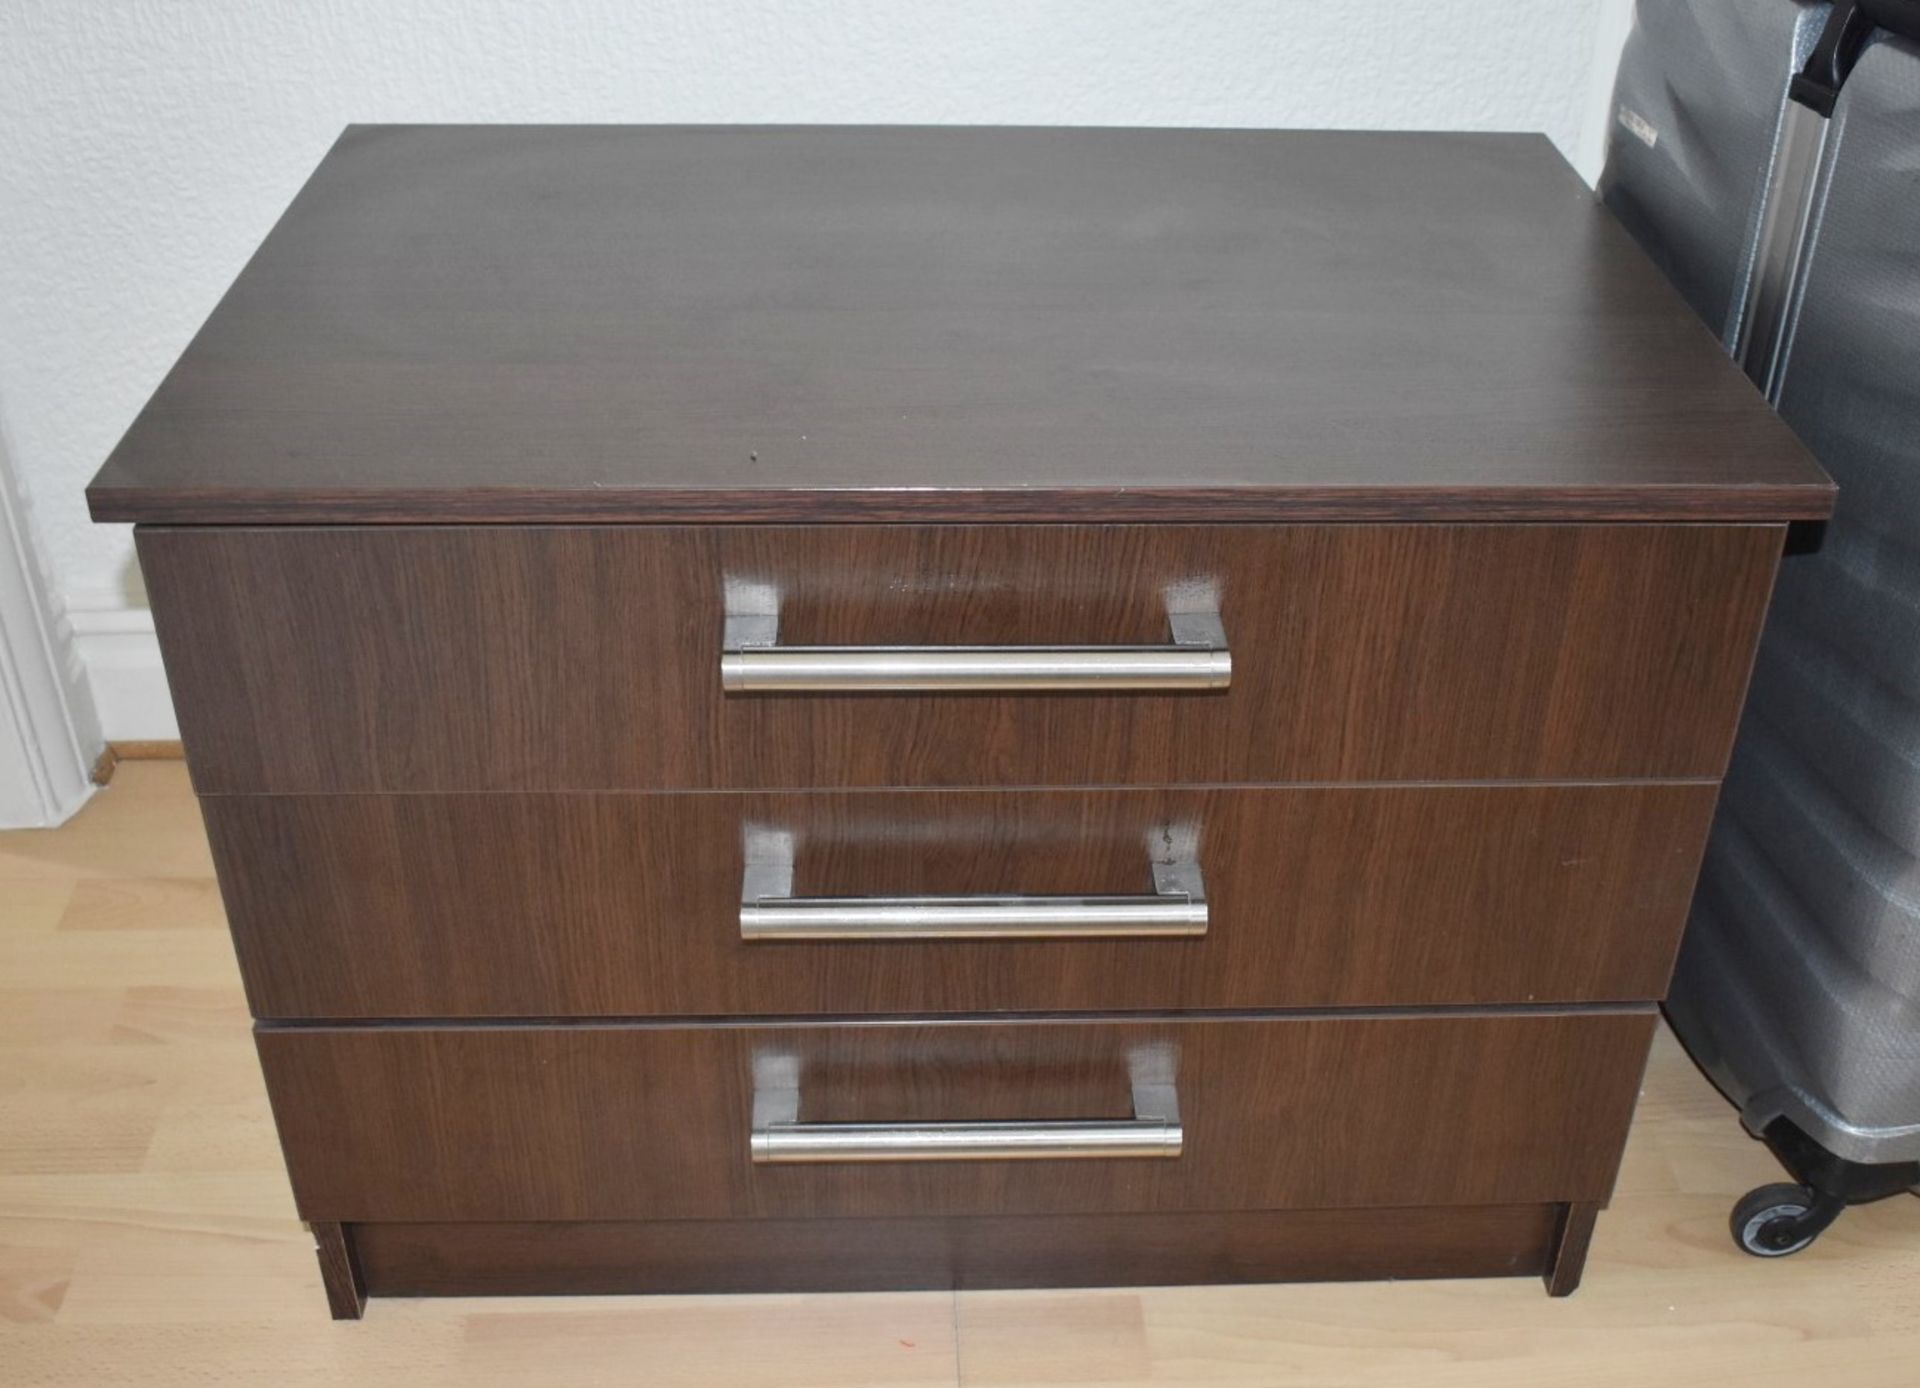 1 x Chest of Drawers With Walnut Finish - Dimensions: H60 x W81 x D54 cms - No VAT on the Hammer - - Image 2 of 5